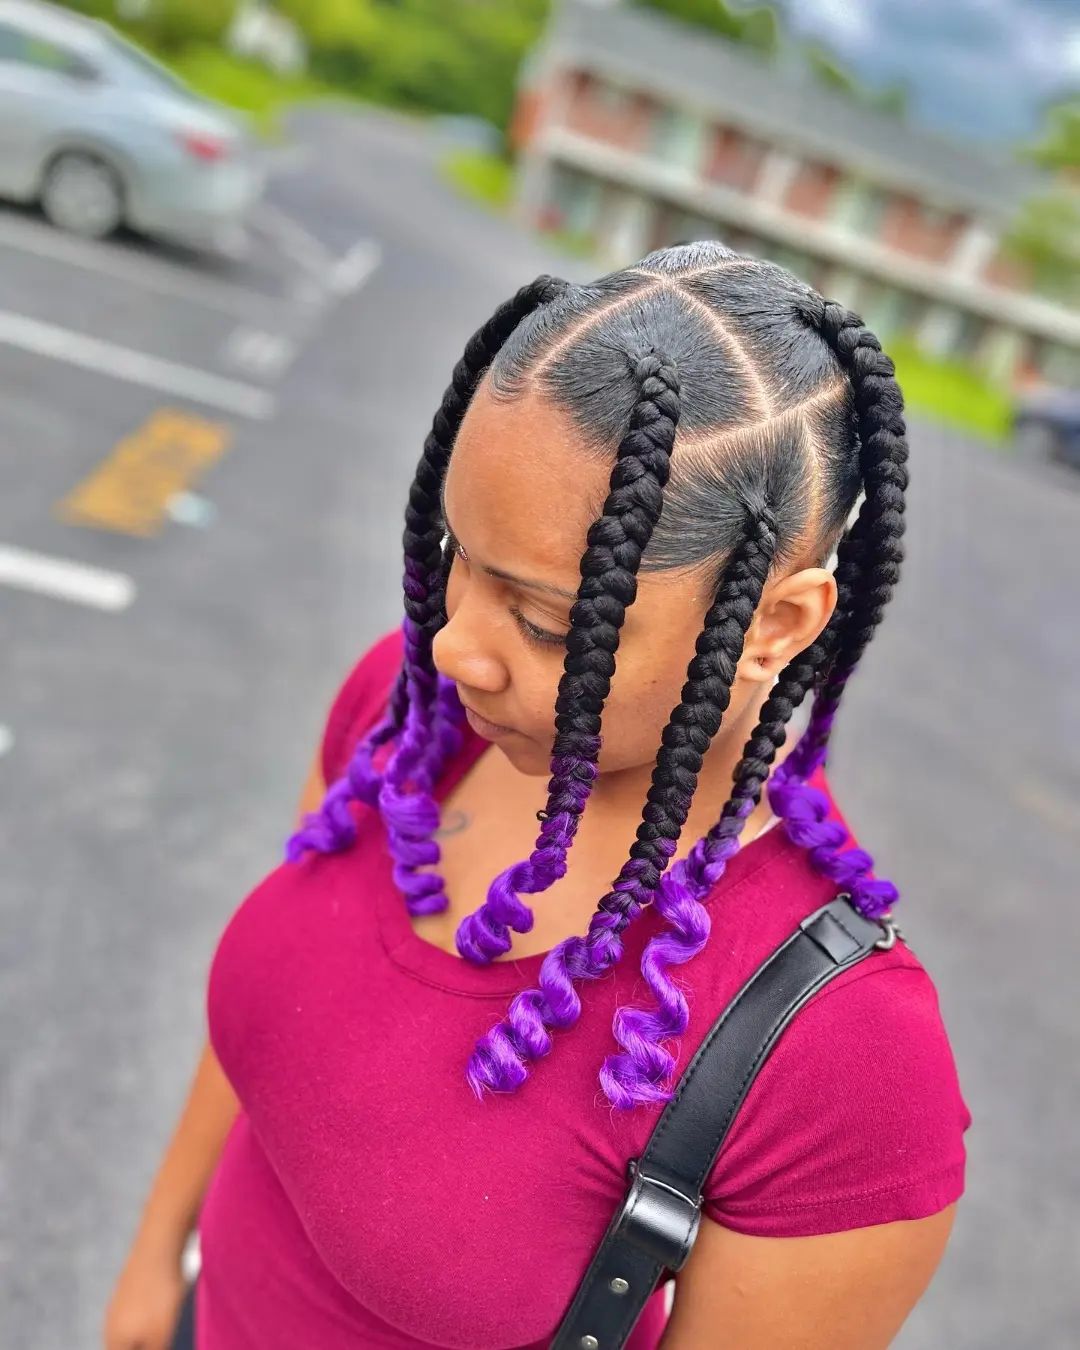 46. Short Scanty Jumbo Black Knotless Braids With Purple Curly Ends